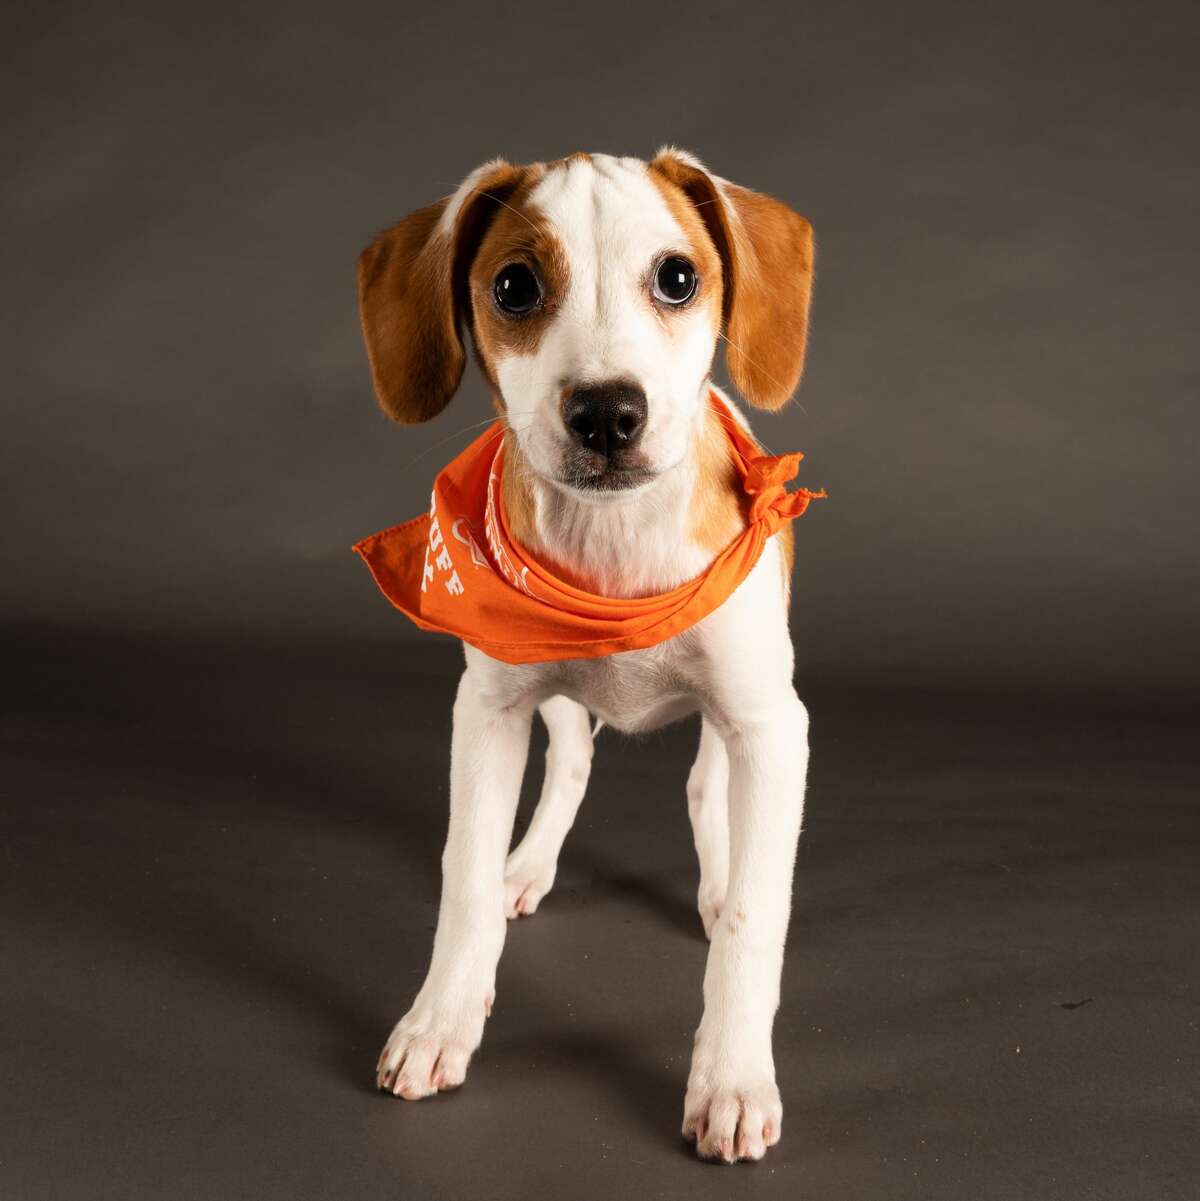 Luna, a beagle and basset hound mix, comes from the Danbury Animal Welfare Society and will compete with Team Ruff.   